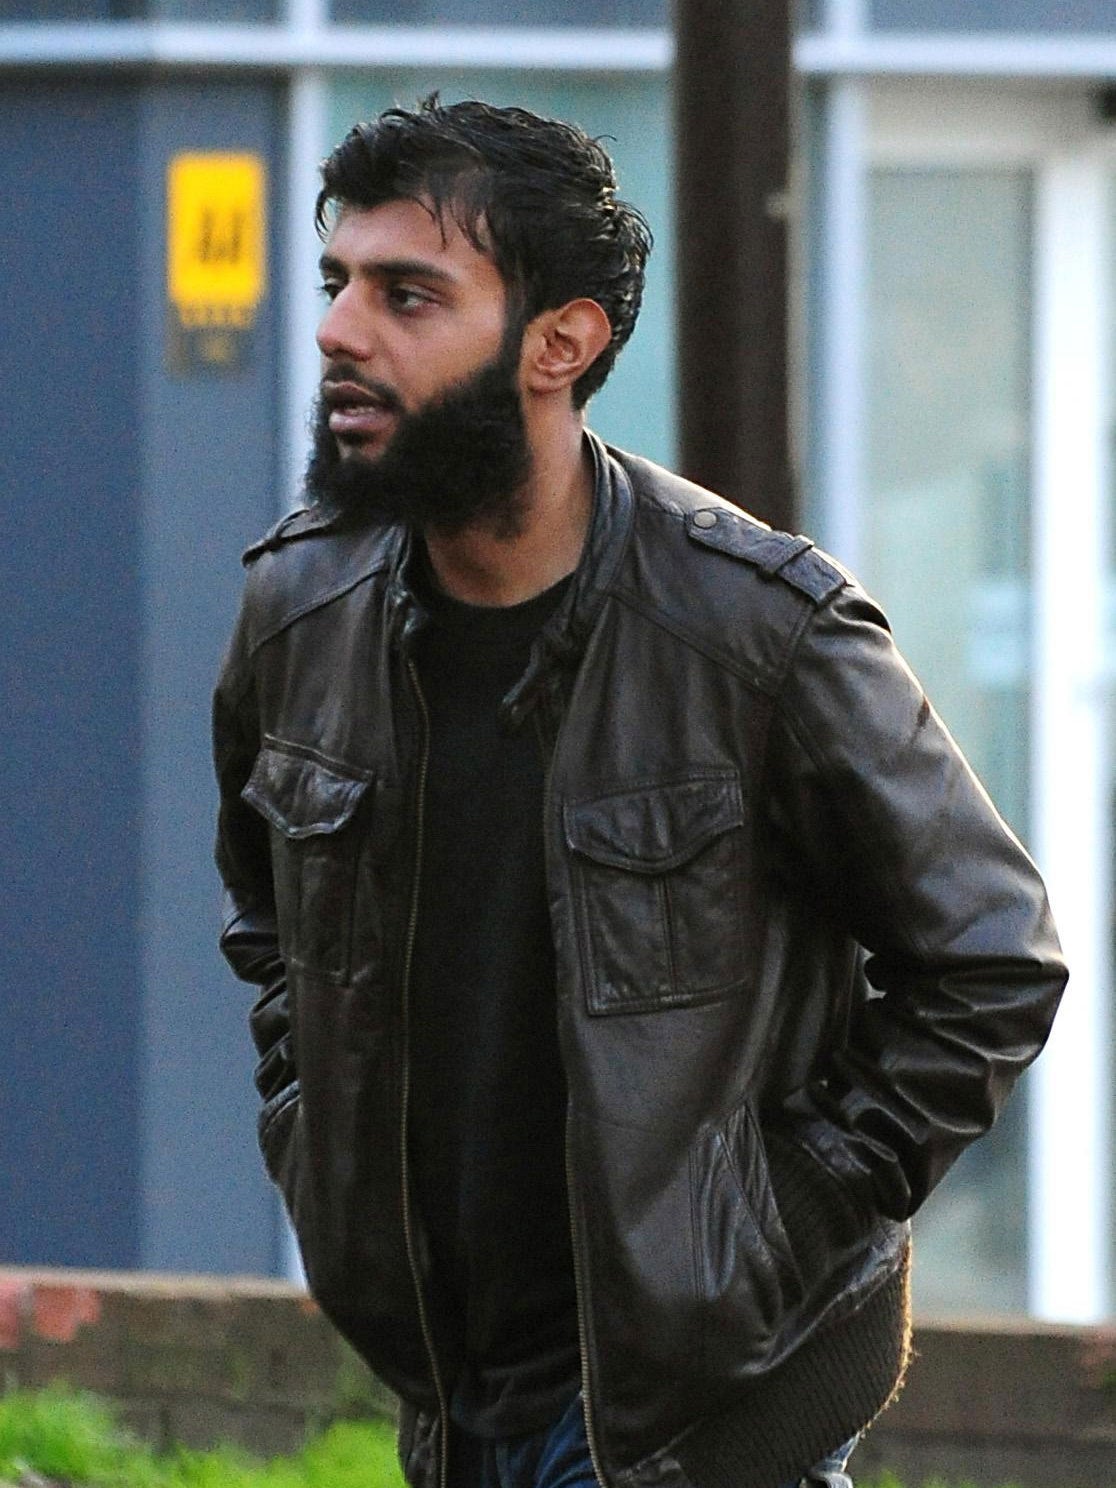 Kabir Ahmed, 28, arrives at Derby Crown Court where, along with 4 others, he is to go on trial accused of stirring up hatred on the grounds of sexual orientation in the first prosecution of its kind